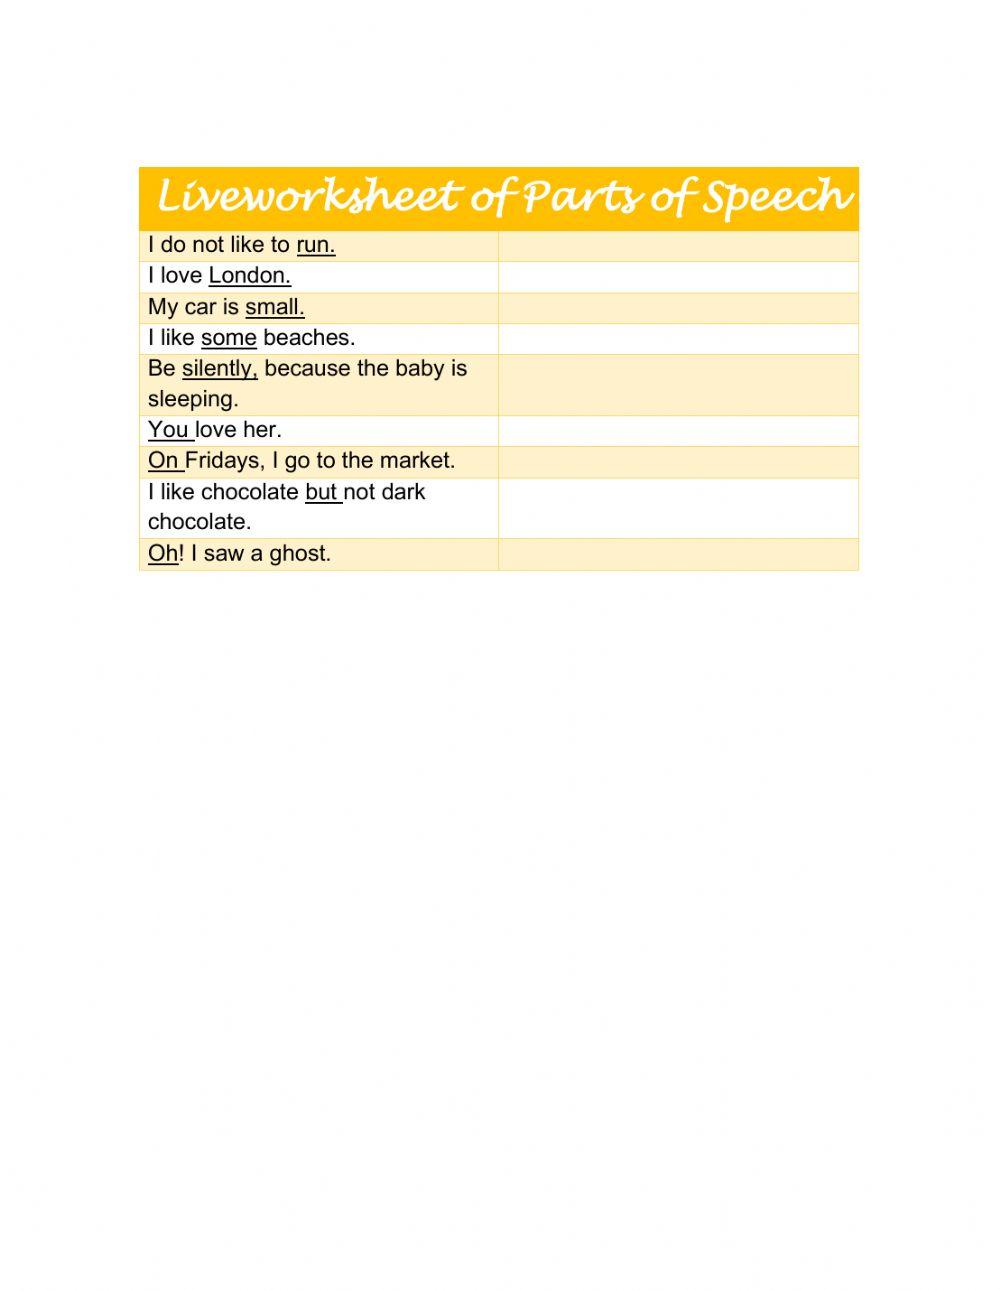 Liveworksheet of Parts of Speech